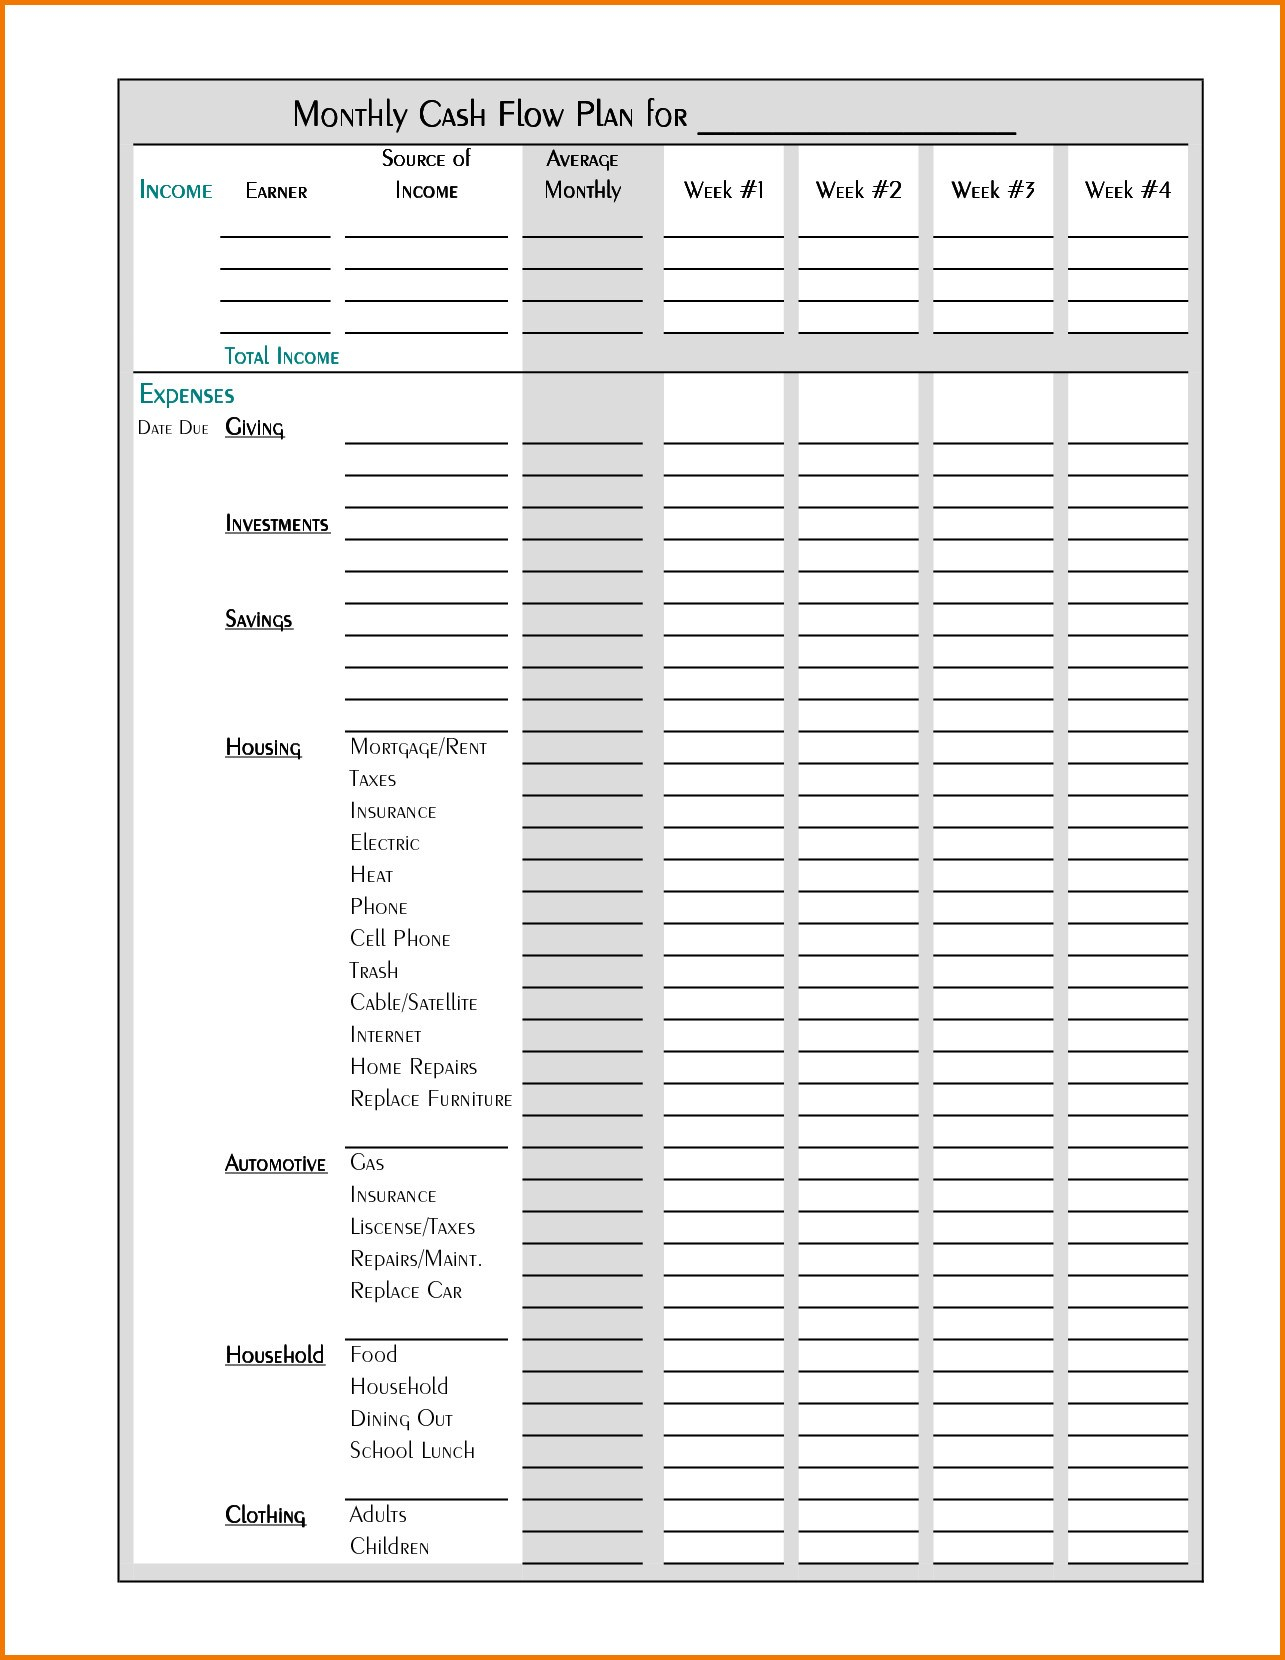 Free Expense Spreadsheet Sample Monthly Income And Expenses Throughout Quarterly Report Template Small Business